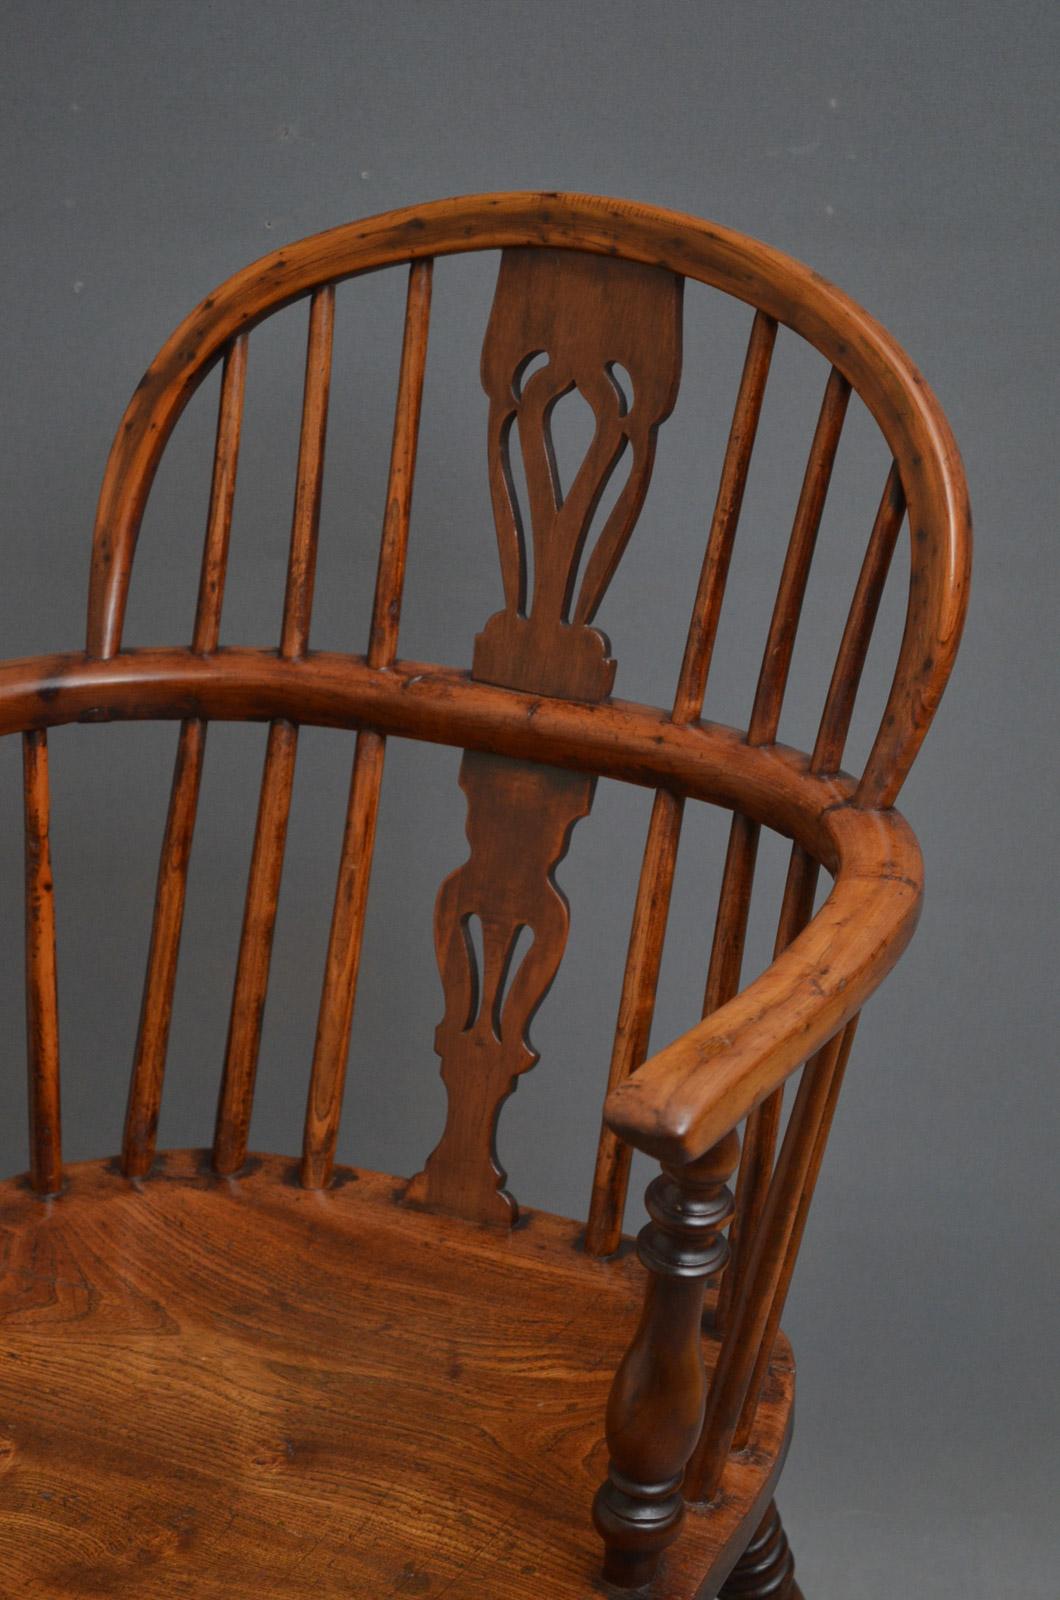 Sn3224, early Victorian, yew wood and elm, low back windsor chair with fretted central splat to back, standing on turned, ringed legs united with stretchers, all in original condition throughout, ready to place at home, circa 1850
Measures: H 17